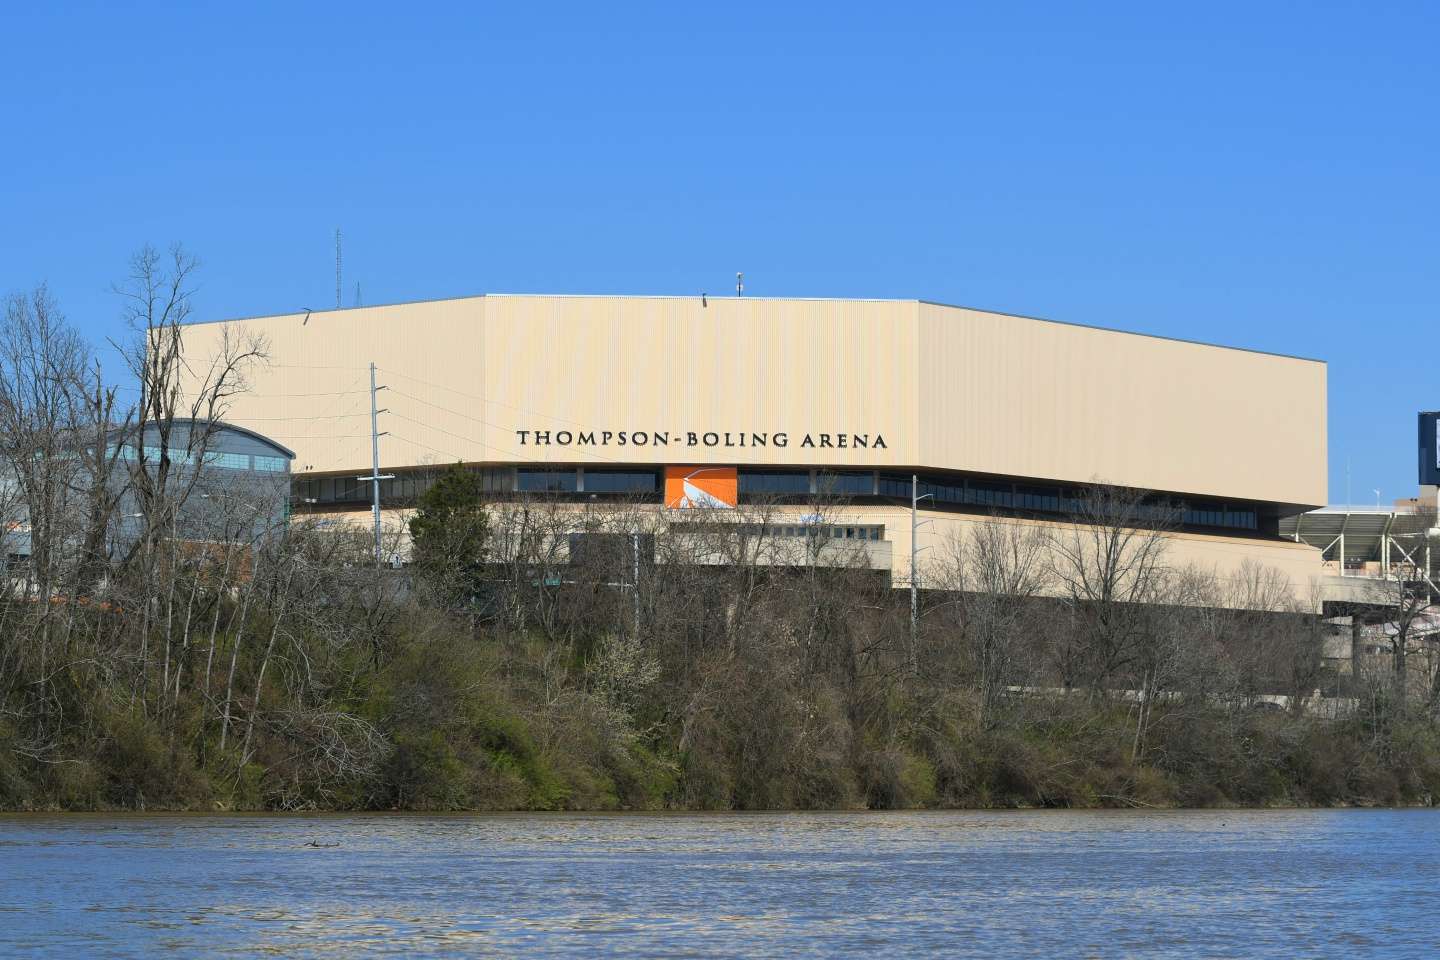 Thompson-Boling Arena is home to the University of Tennessee Volunteers menâs basketball team, the Lady Vols womenâs basketball team and the Vols volleyball programs. 